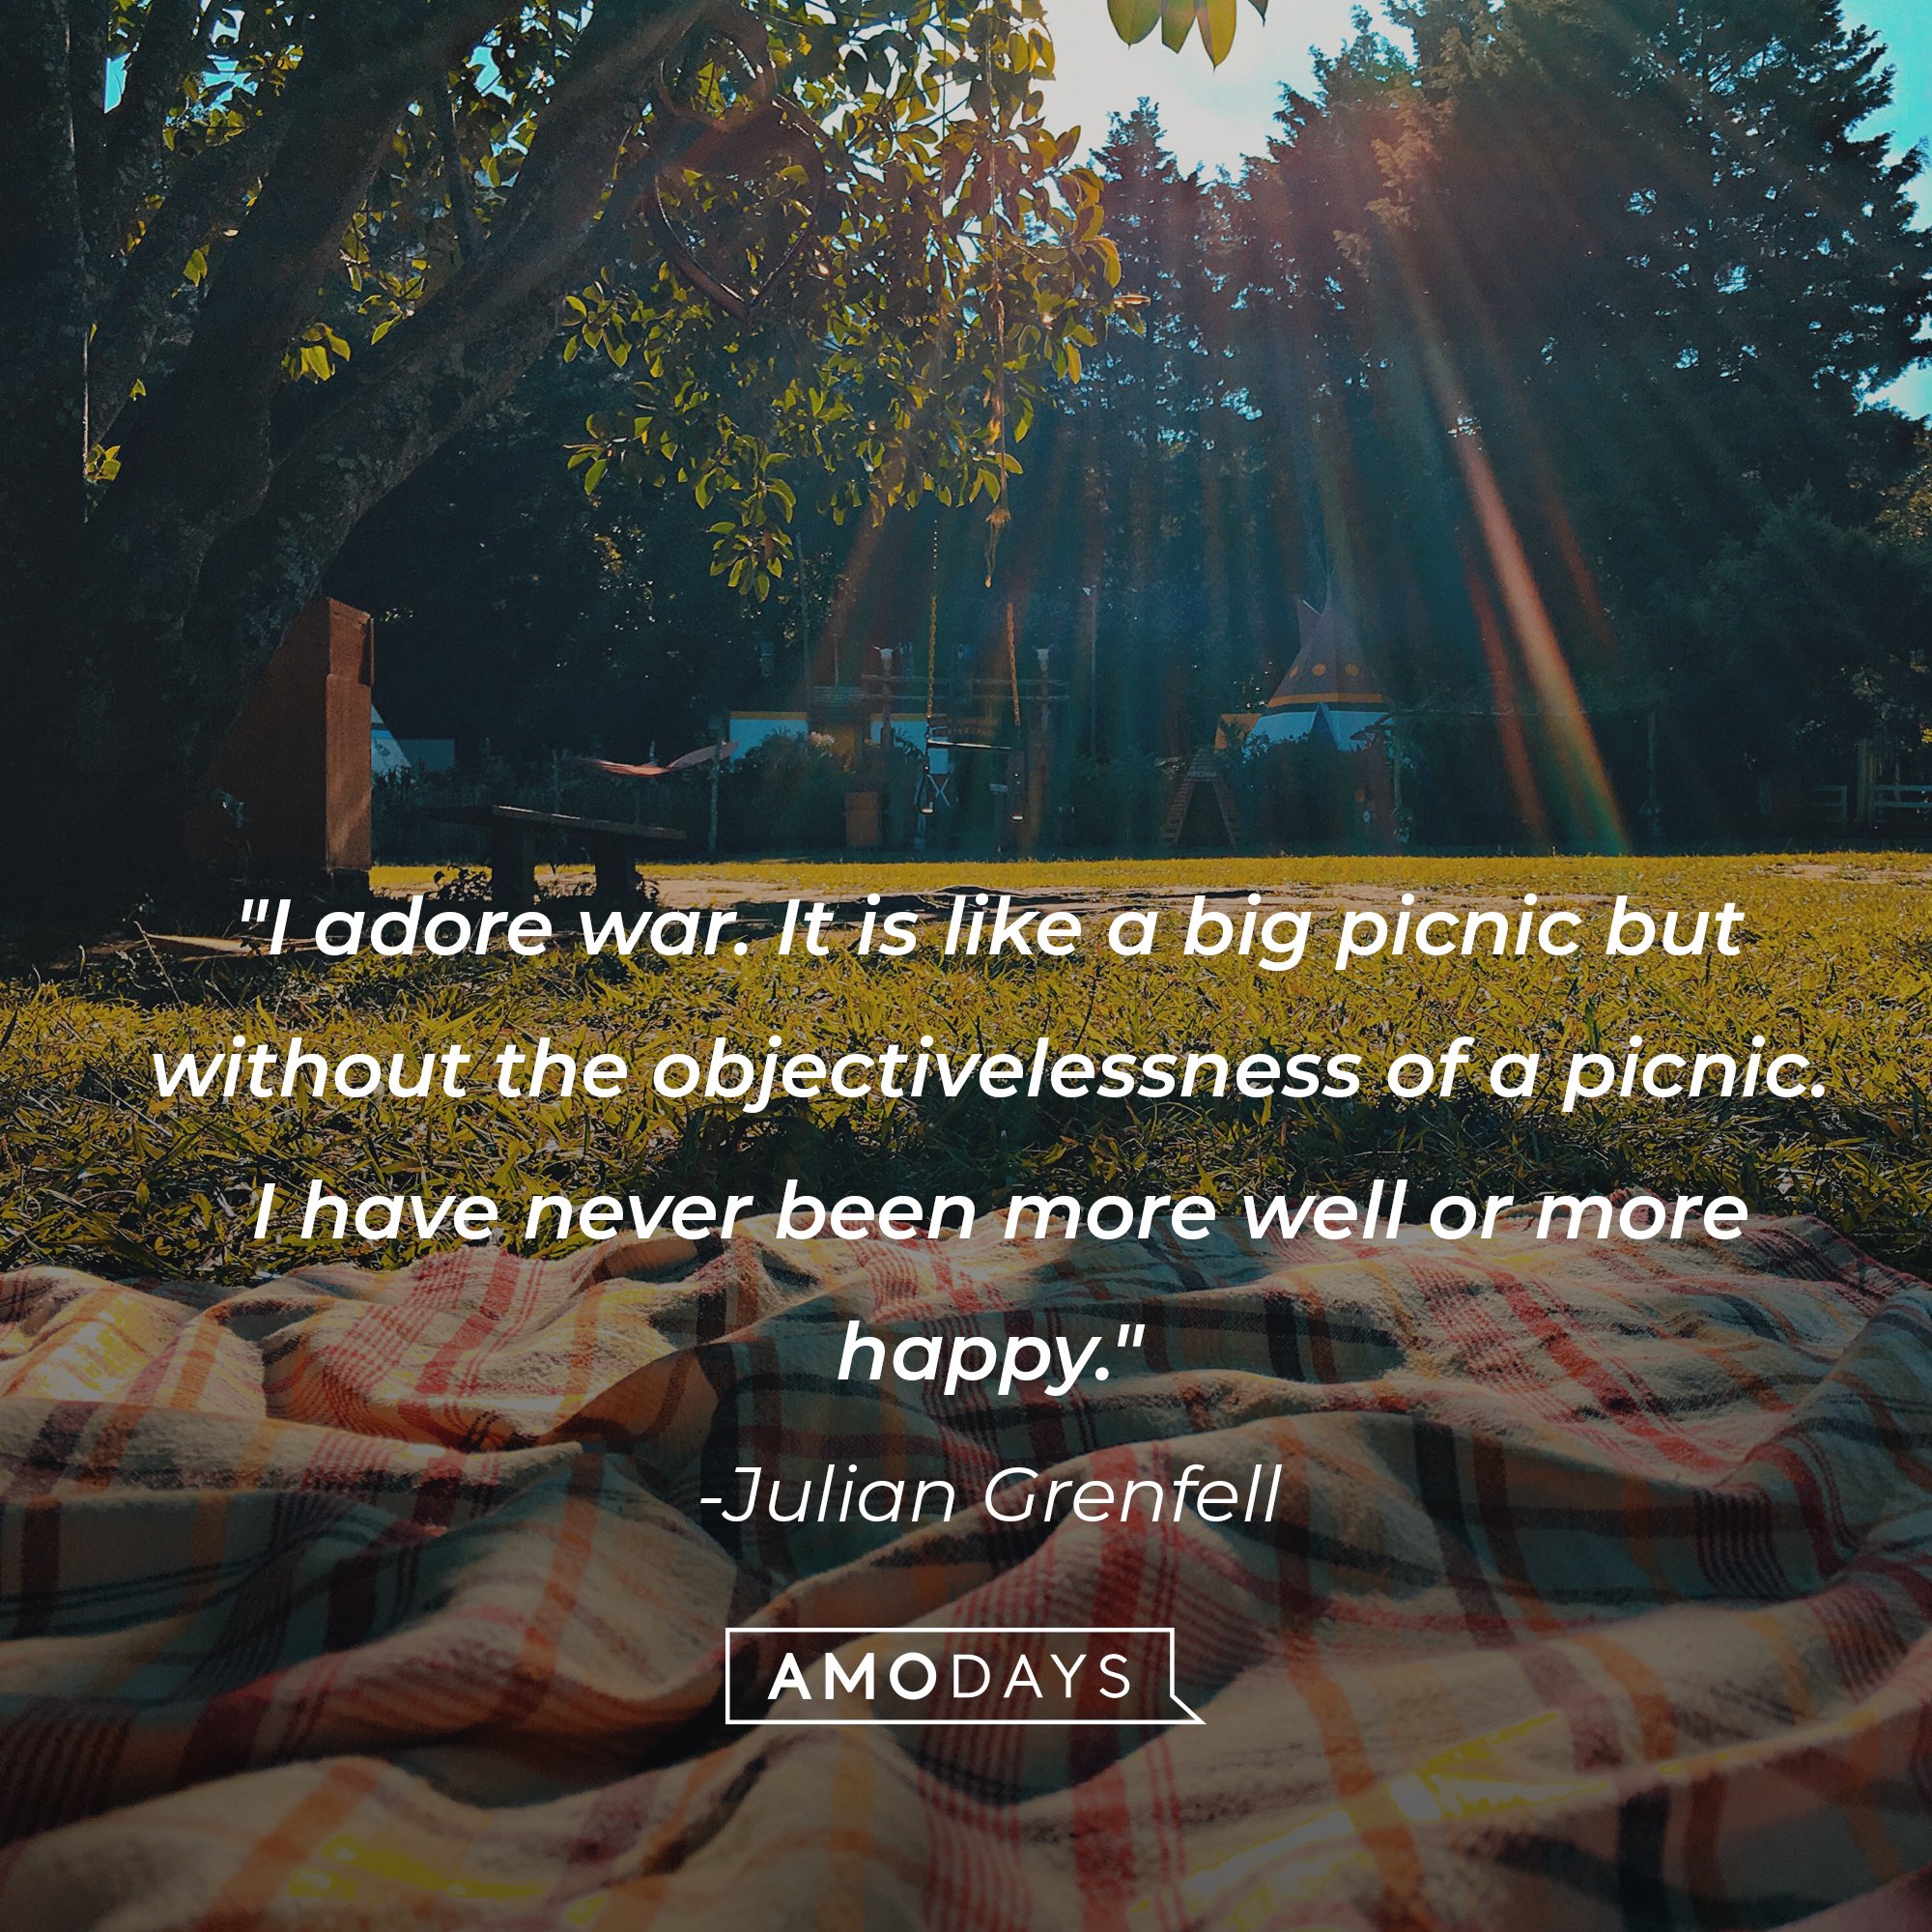 Julian Grenfell's quote: "I adore war. It is like a big picnic but without the objectivelessness of a picnic. I have never been more well or more happy." | Image: AmoDays